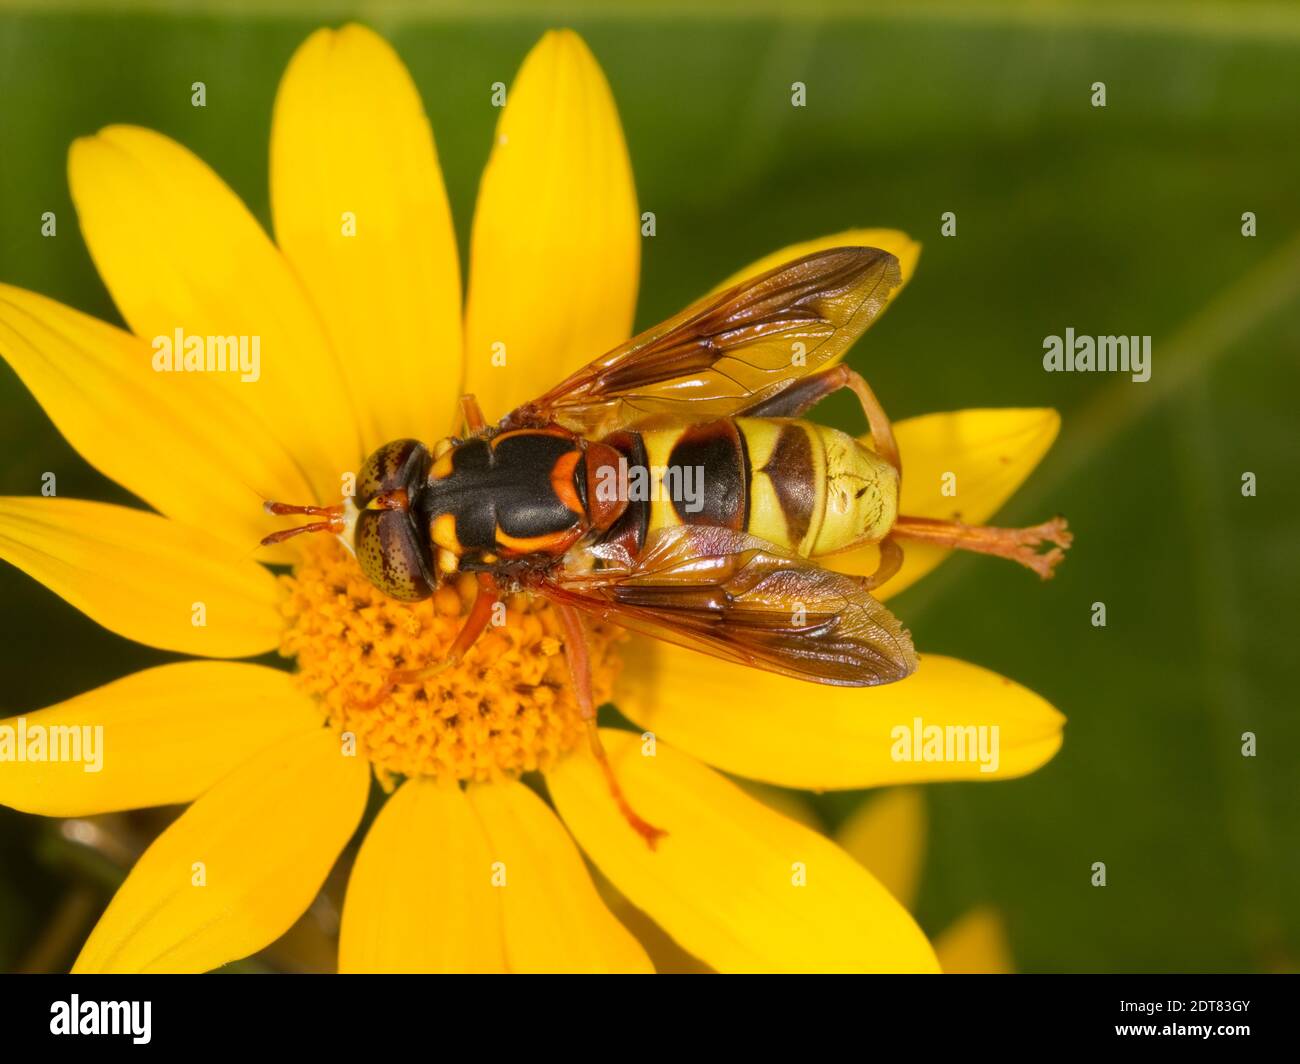 Syrphid Fly male, Spilomyia kahli, Syrphidae. Body Length 16 mm. Nectaring at aster. Wasp mimic. Stock Photo